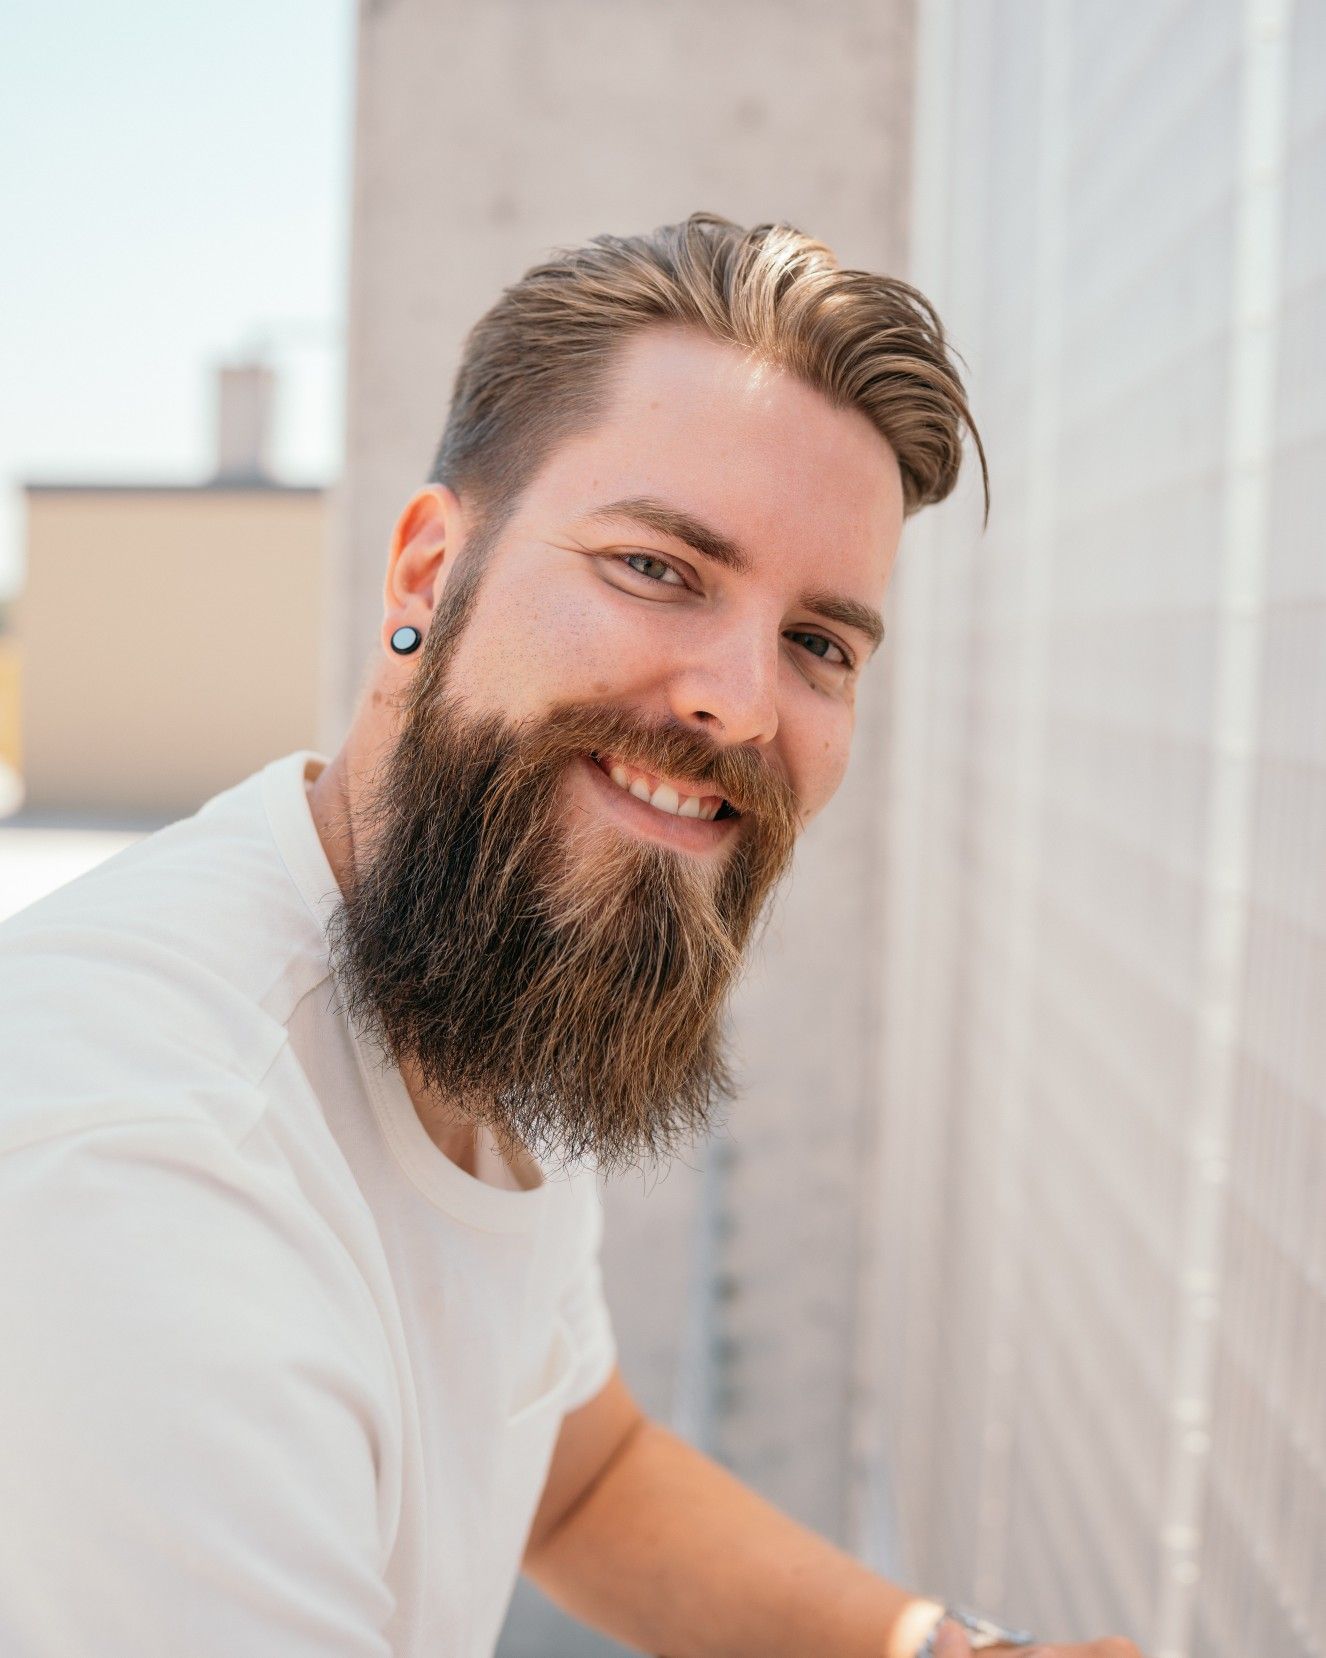 Round Face Men's Hairstyles with Beard: Finding the Perfect Look for You